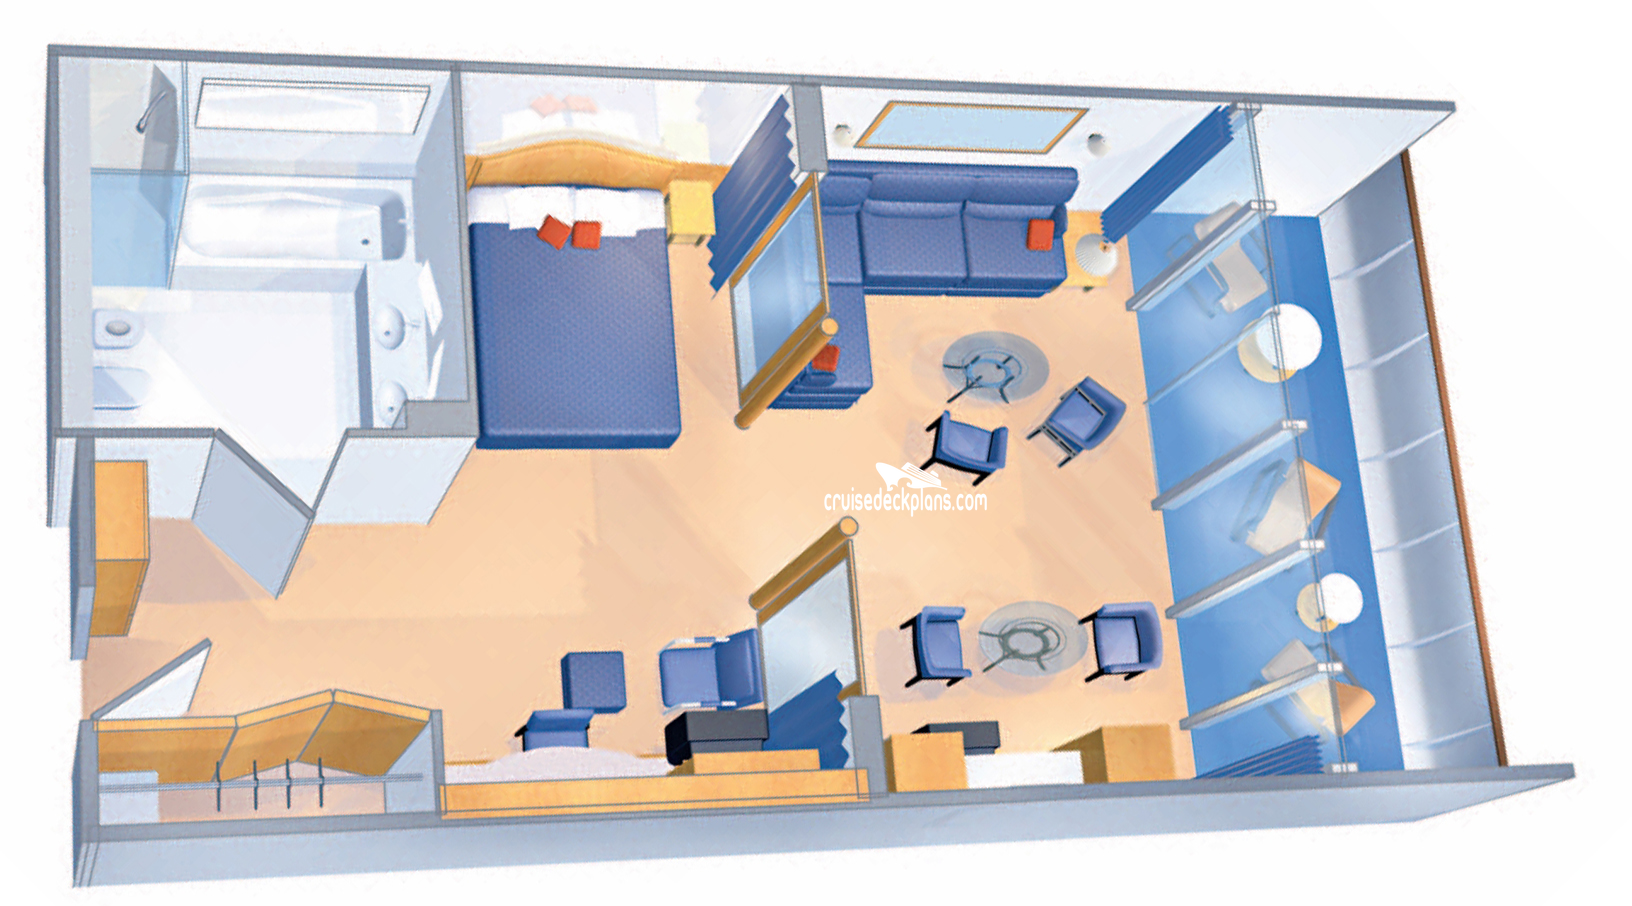 Enchantment of the Seas Owners Suite cabin floor plan